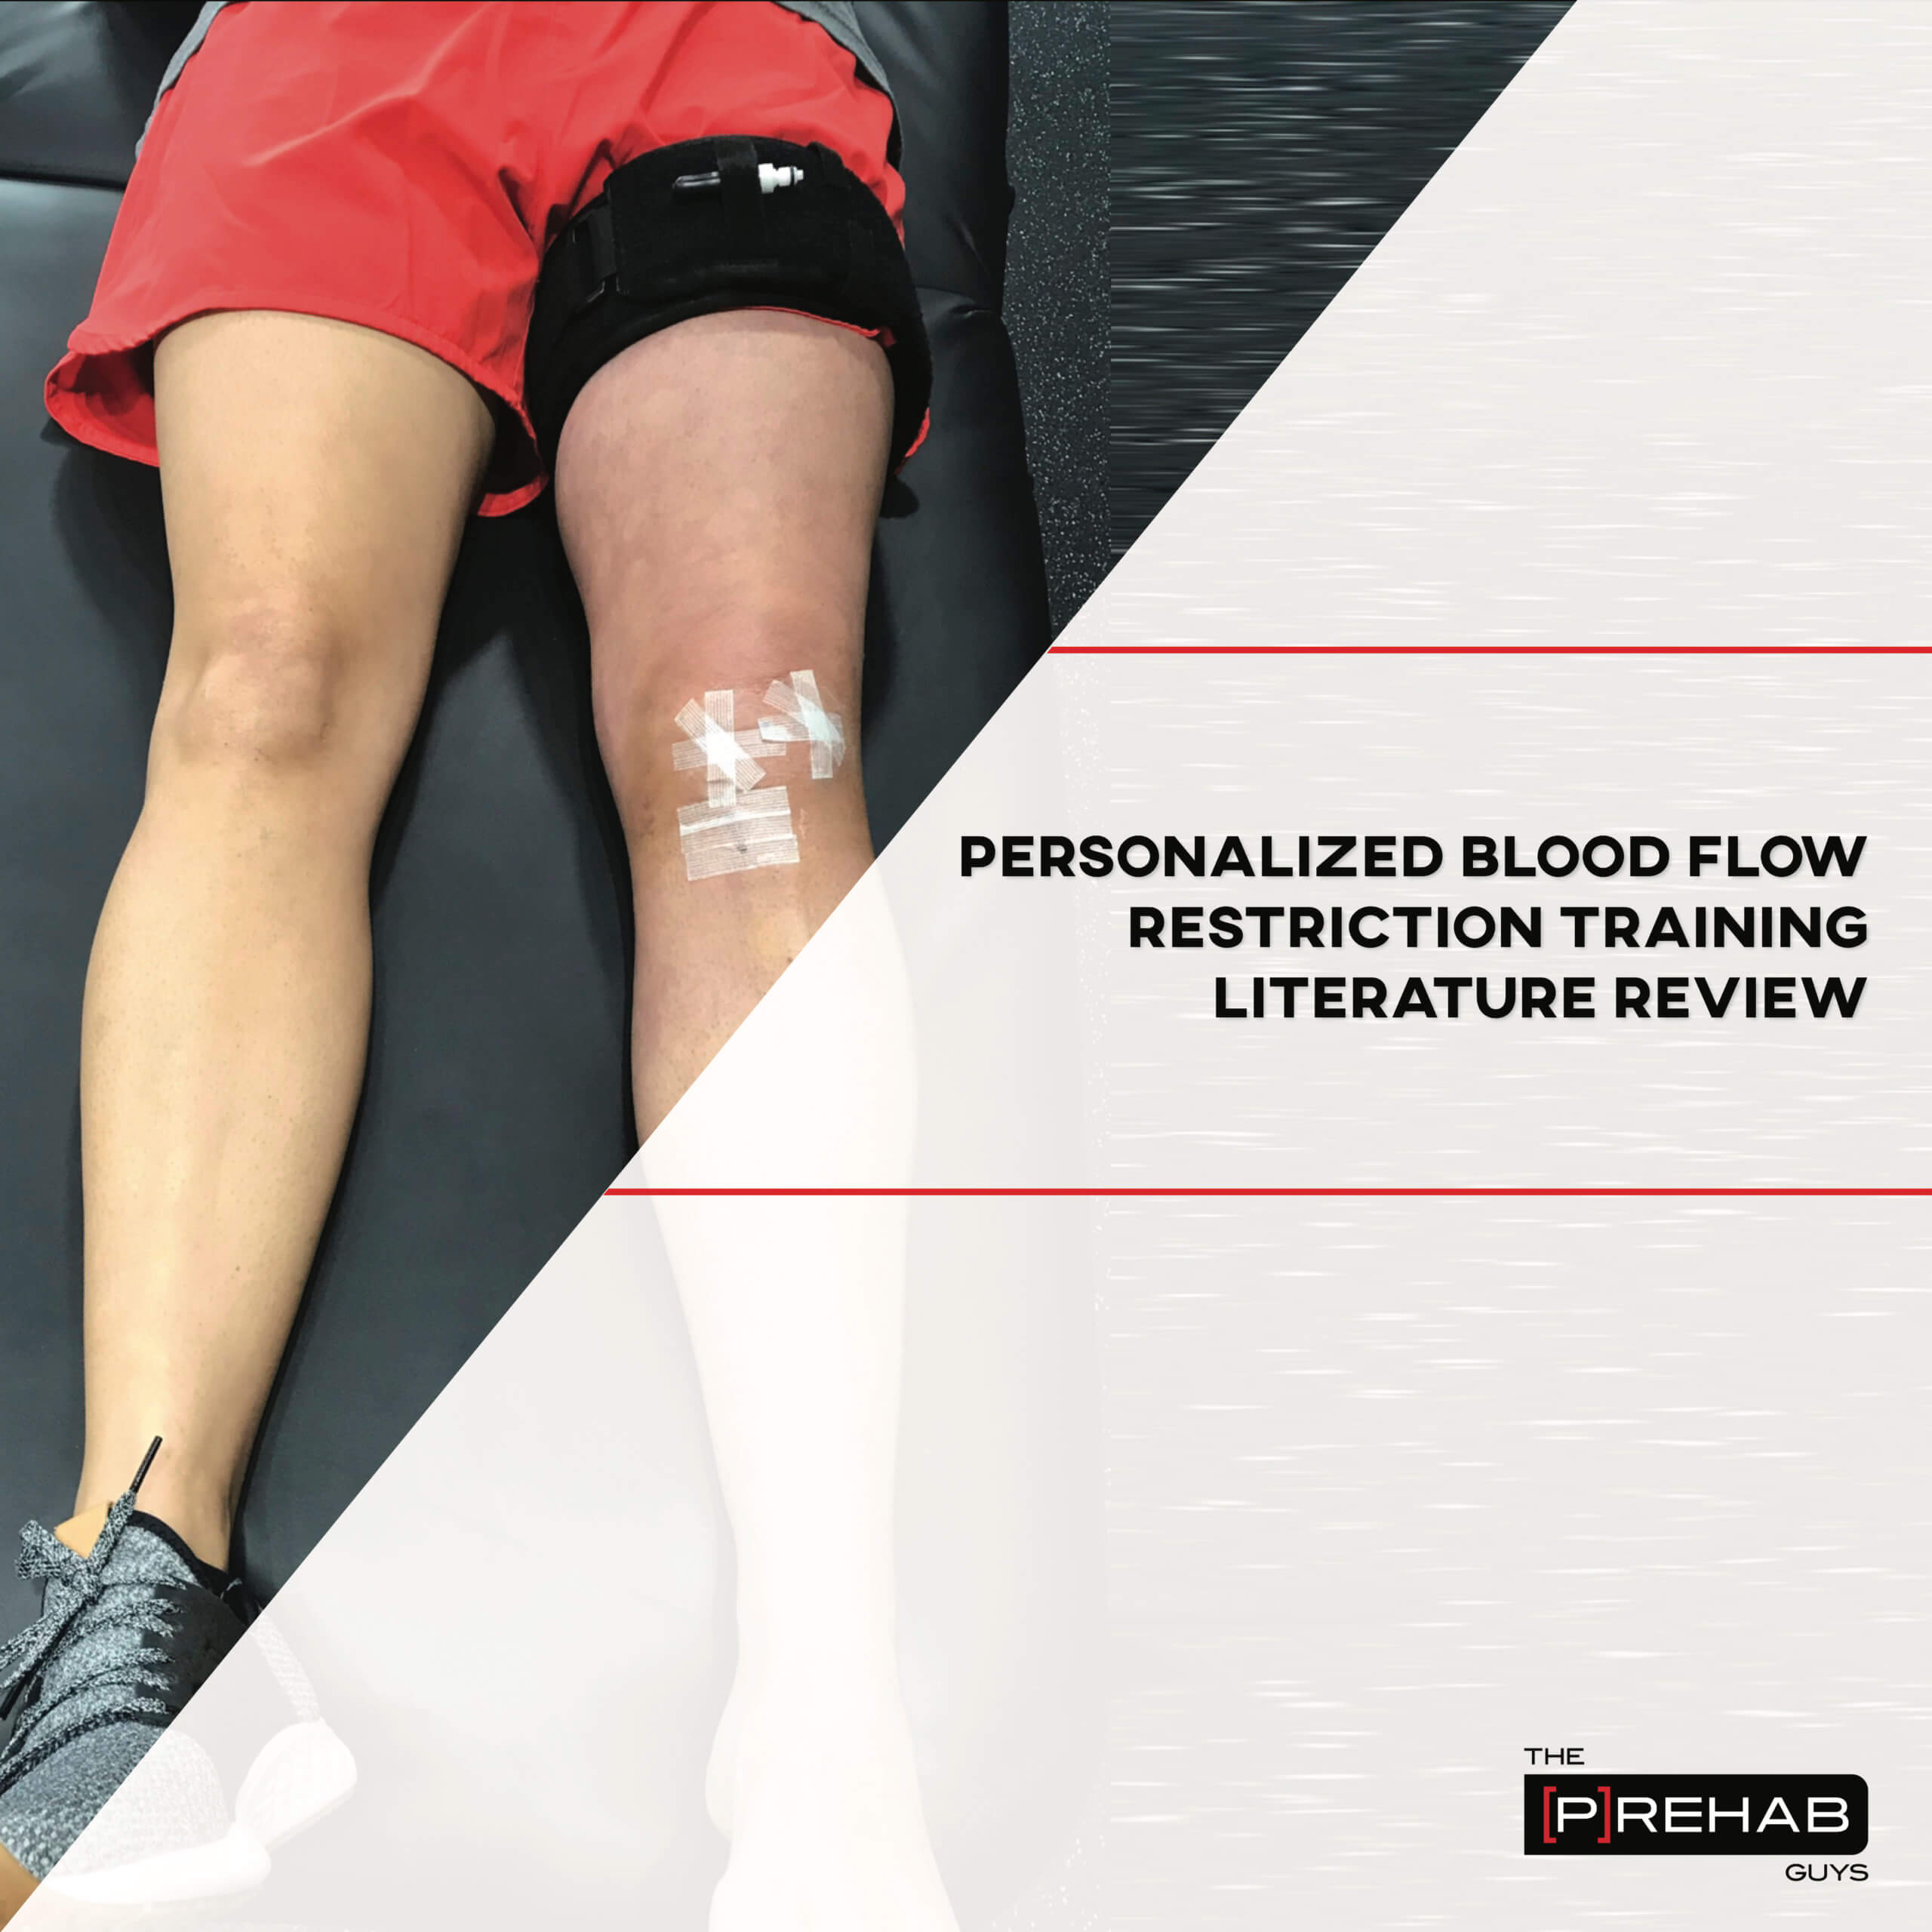 Personalized Blood Flow Restriction Training Literature Review